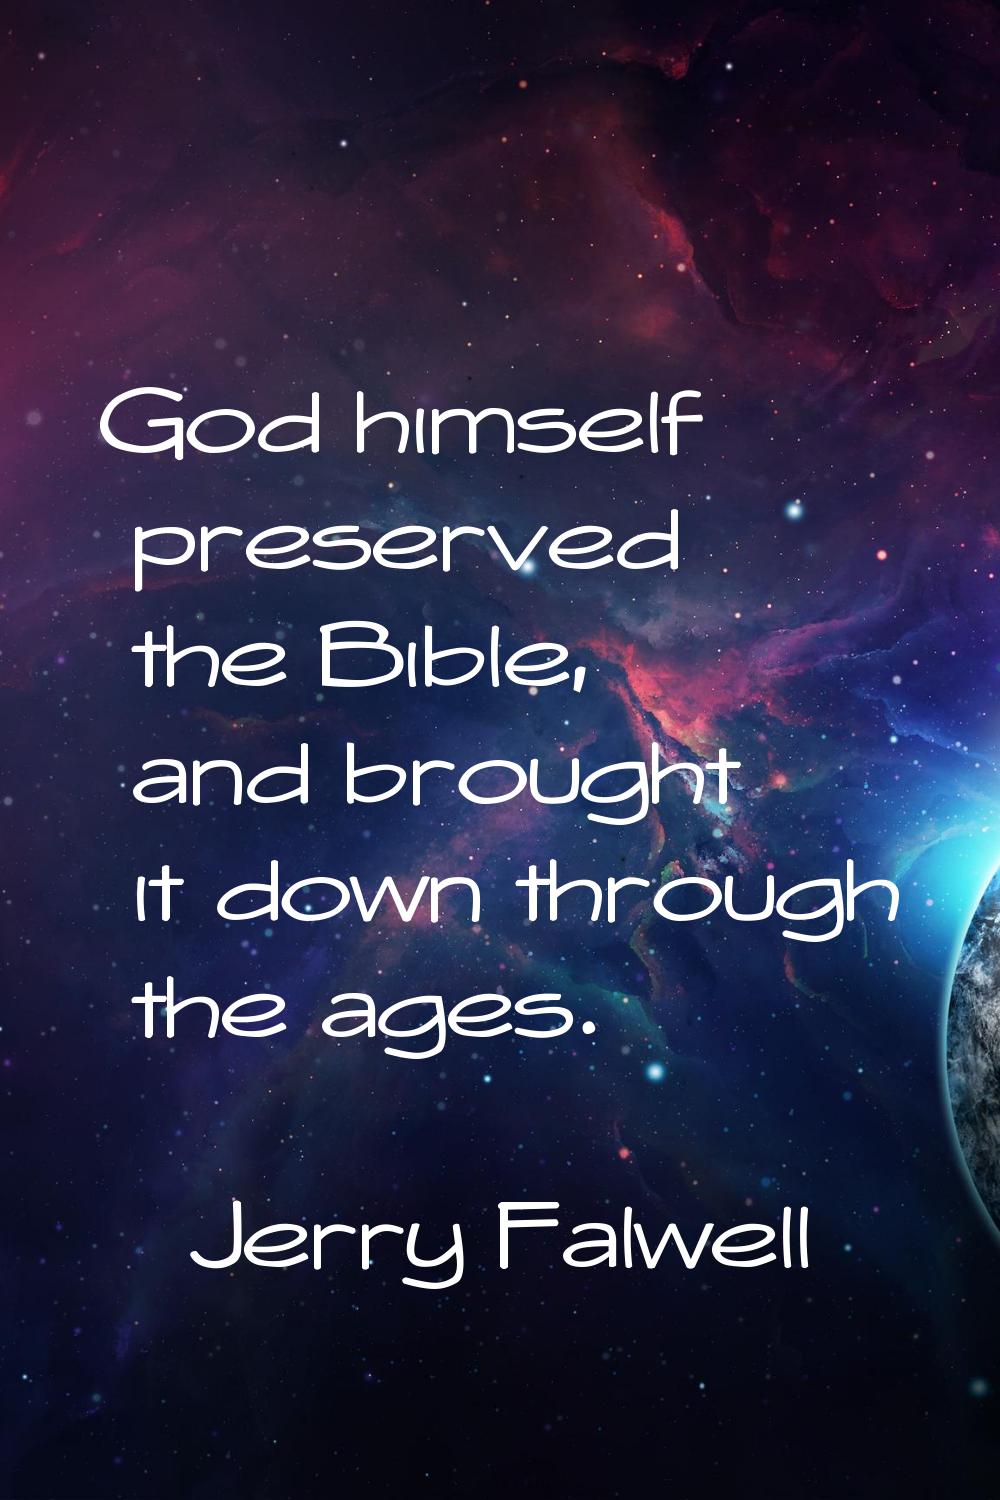 God himself preserved the Bible, and brought it down through the ages.